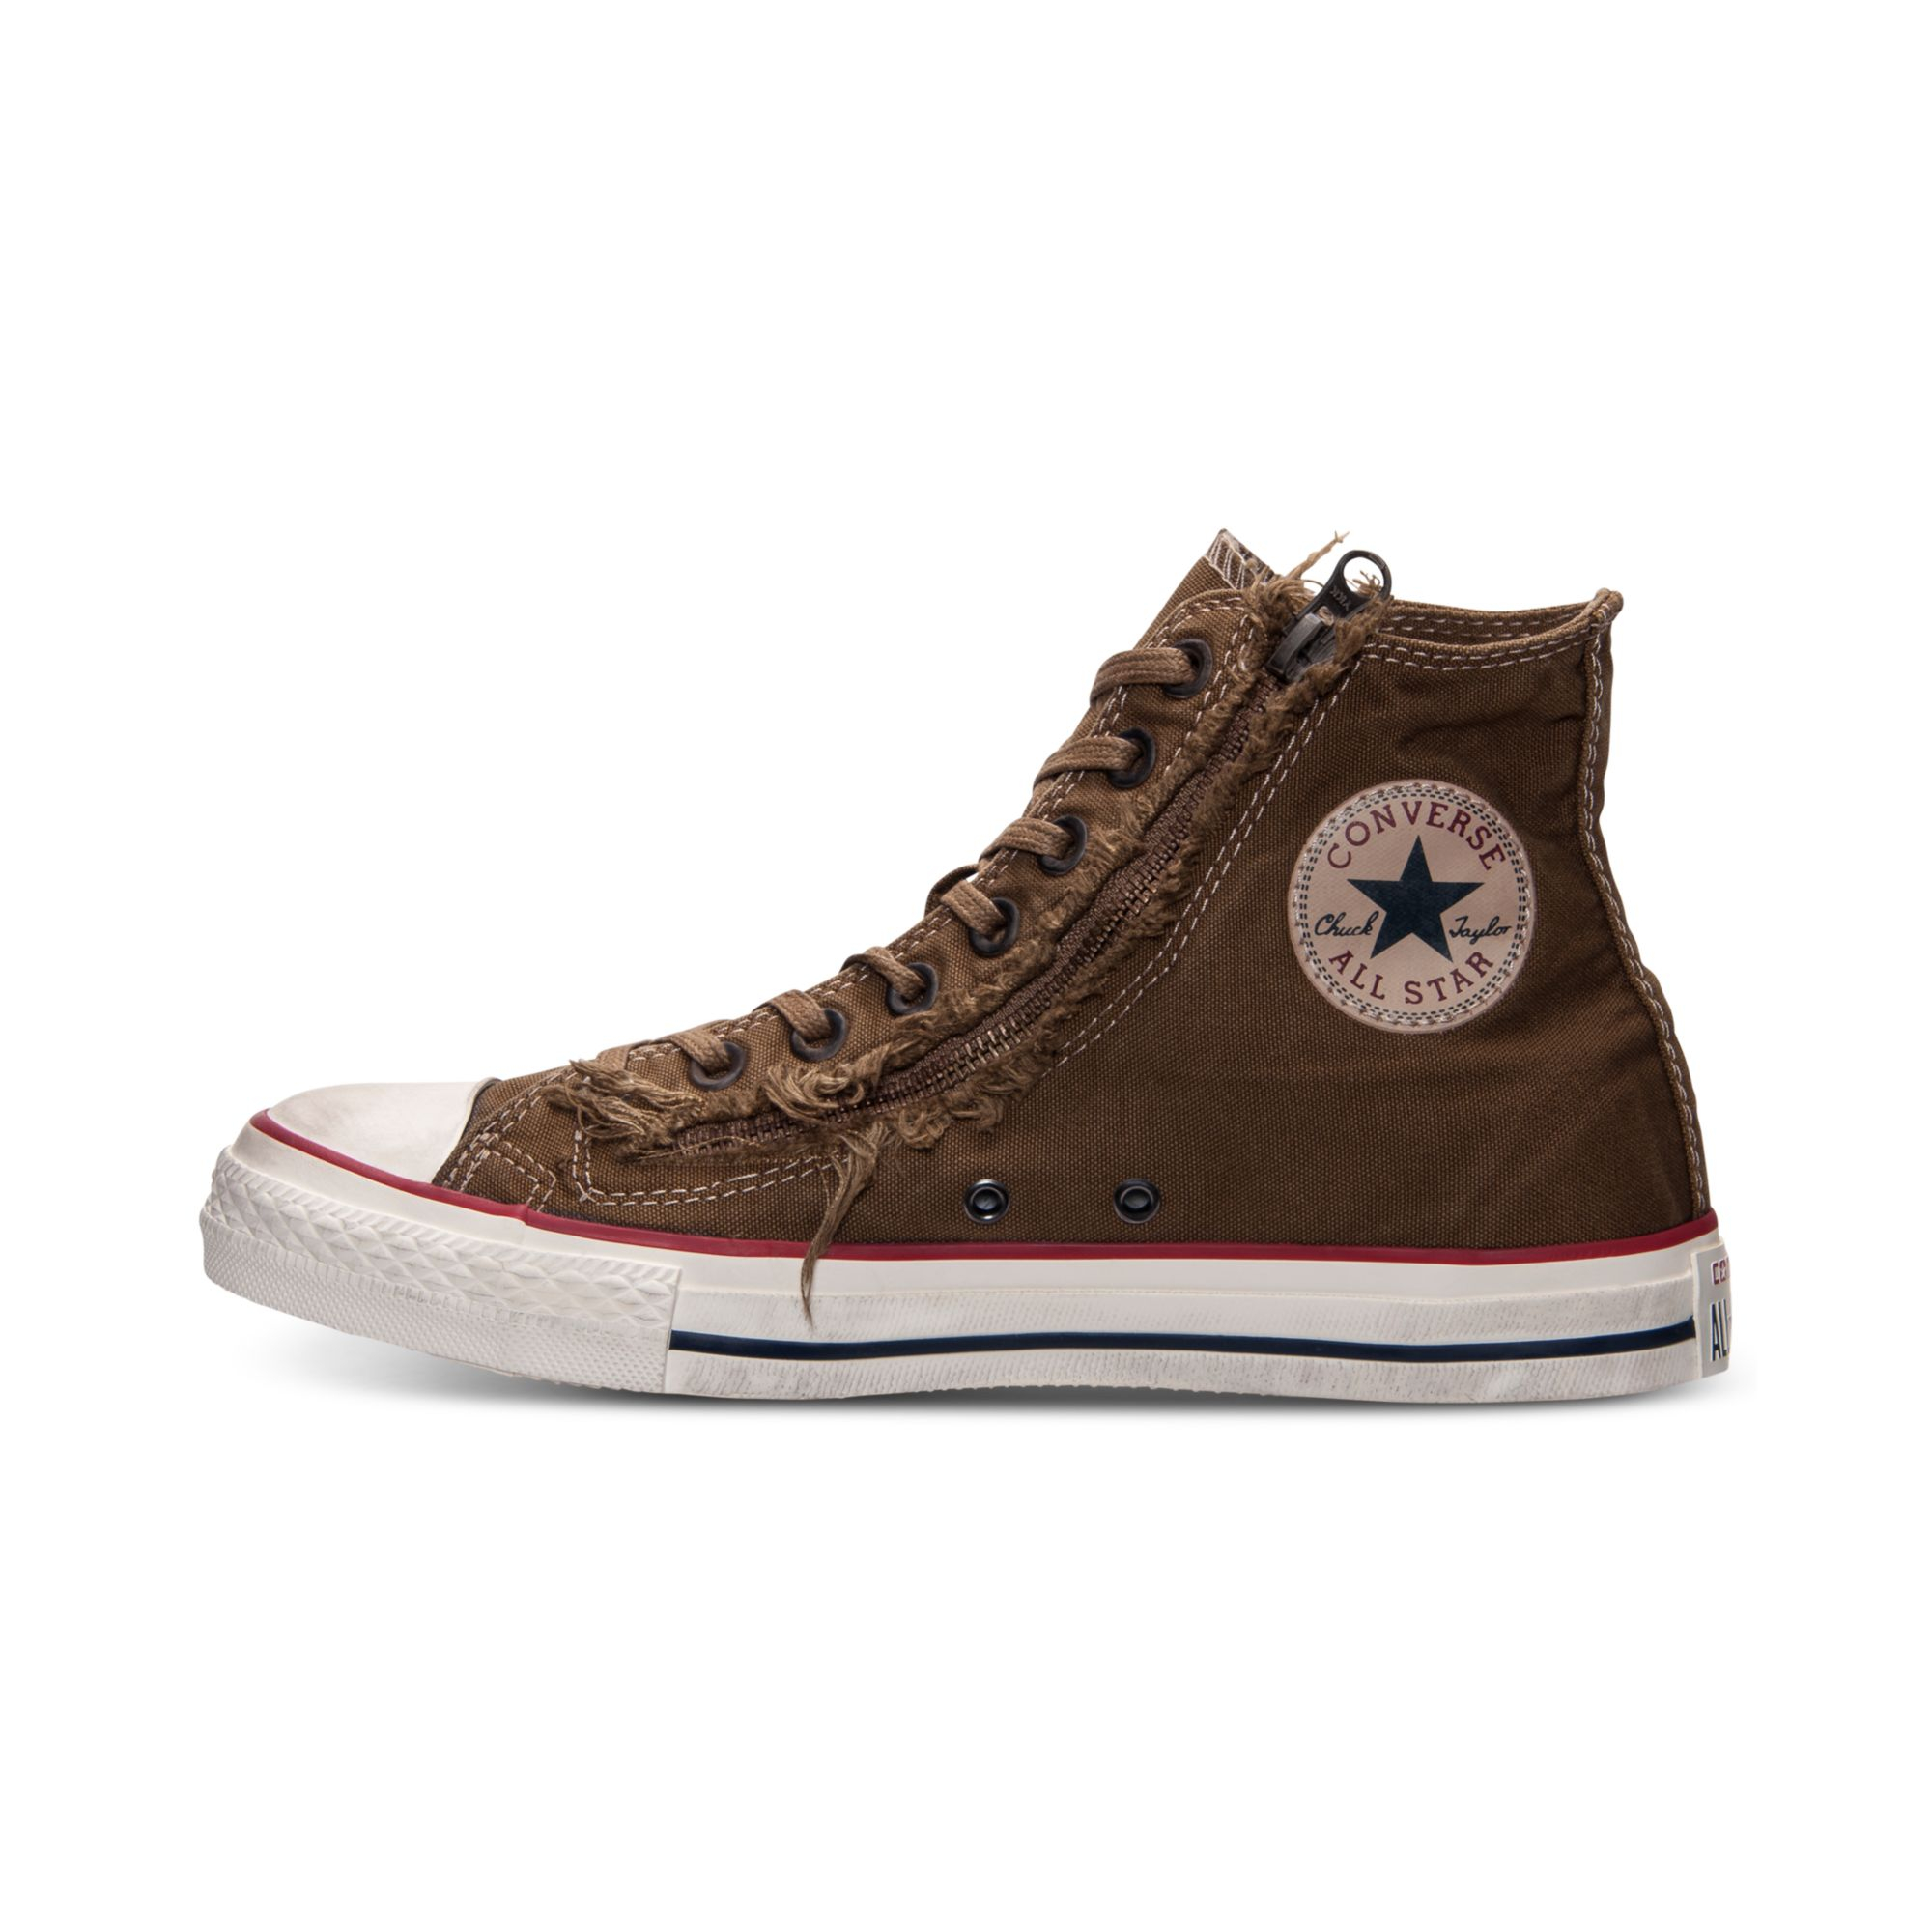 Lyst - Converse Mens Chuck Taylor Double Zip Washed Canvas Hi Casual ...